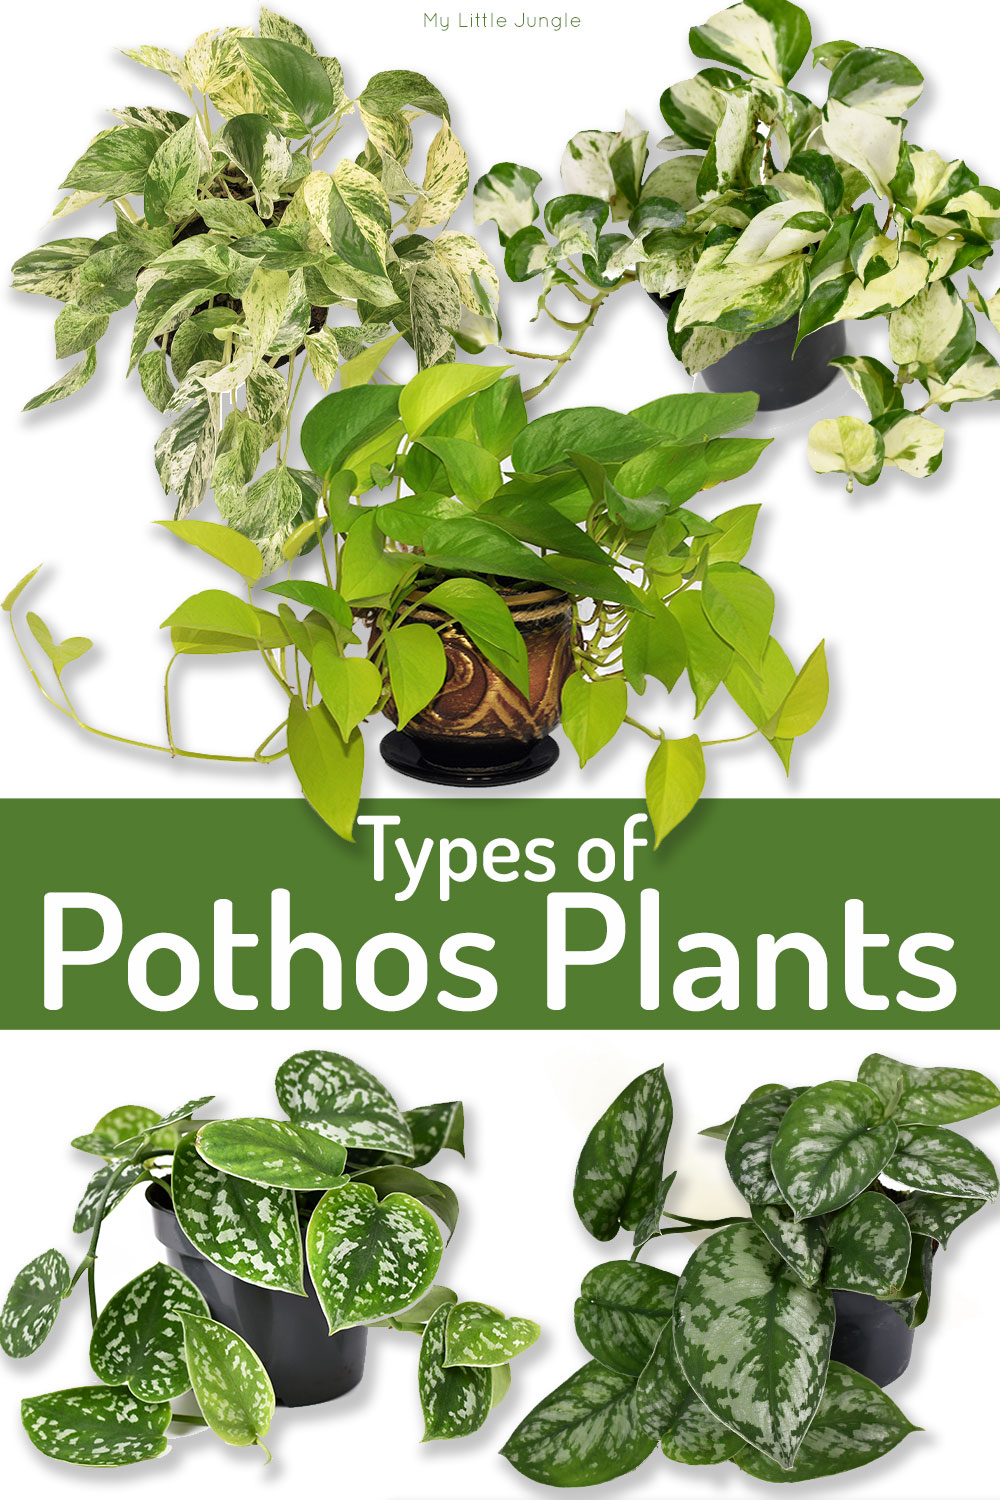 Types of Pothos Plants to Add to Your Collection